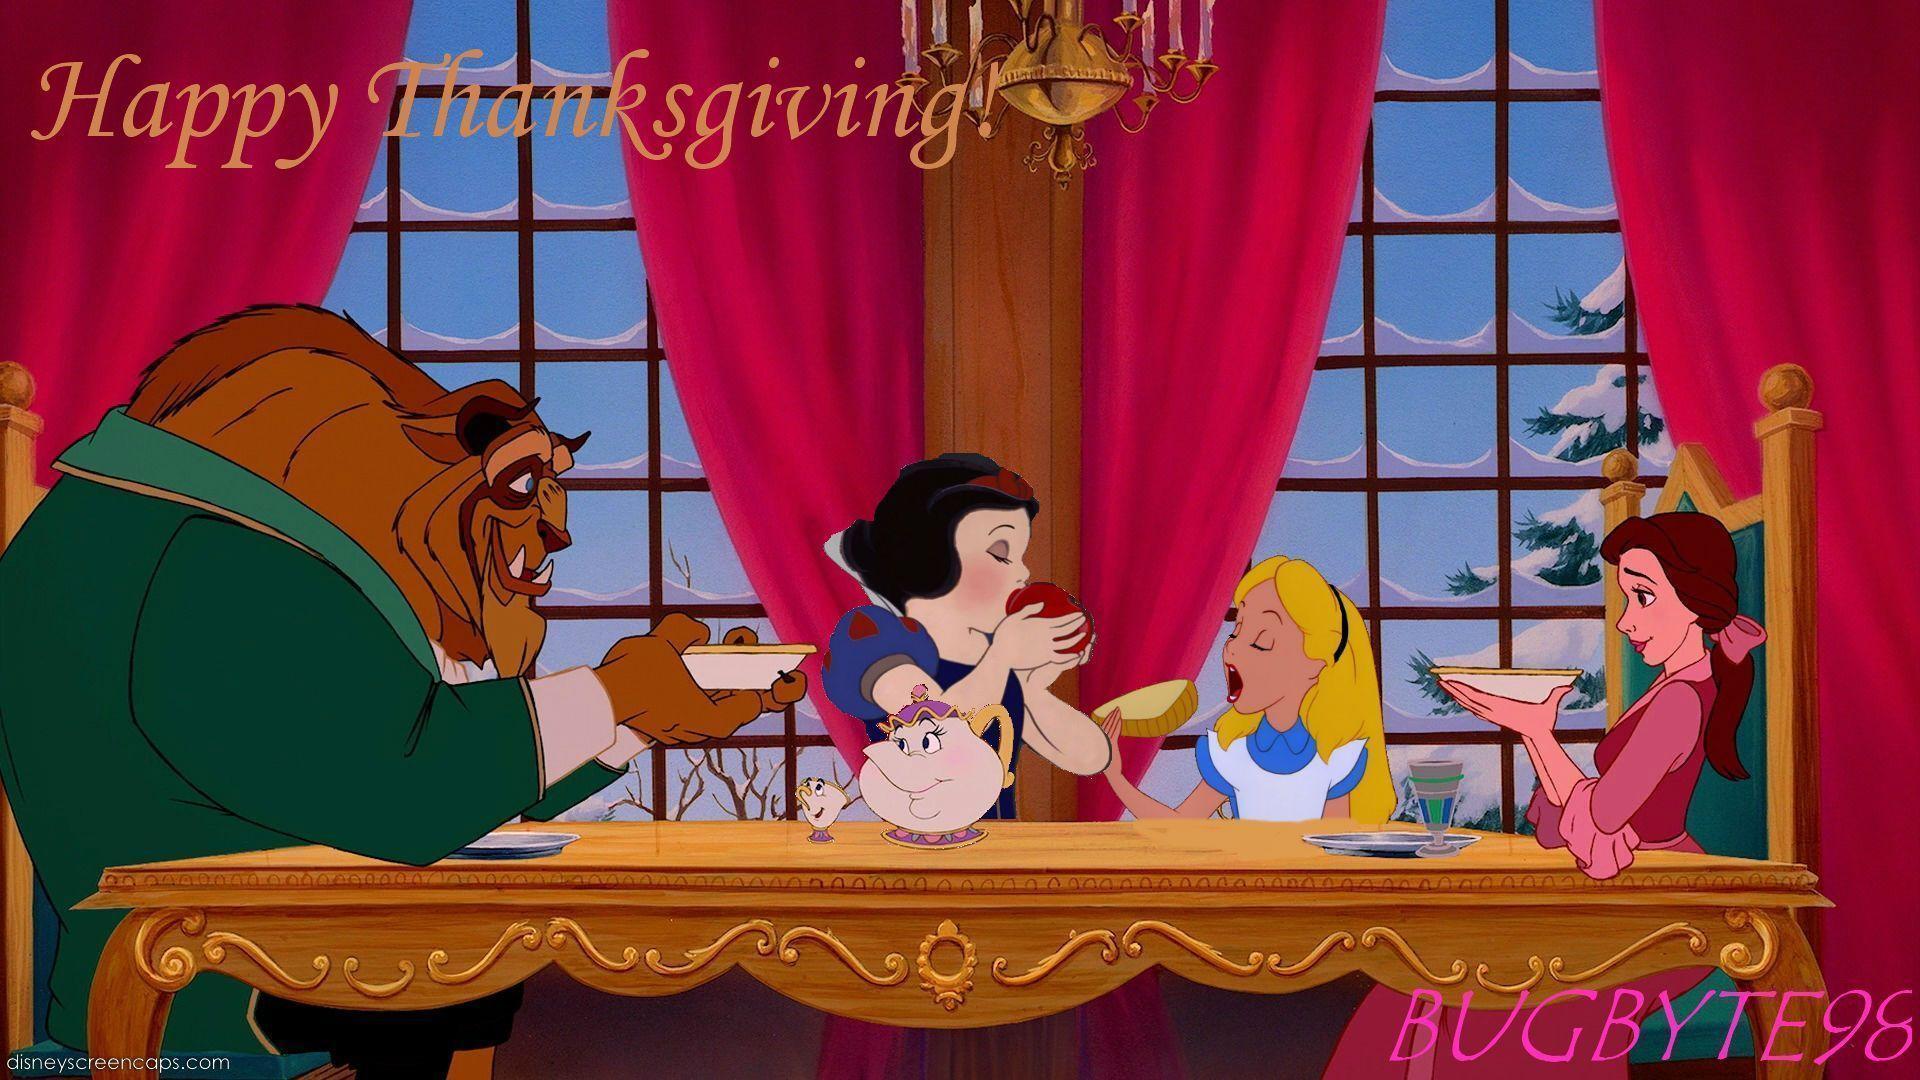 Wallpapers For > Disney Princess Thanksgiving Wallpapers